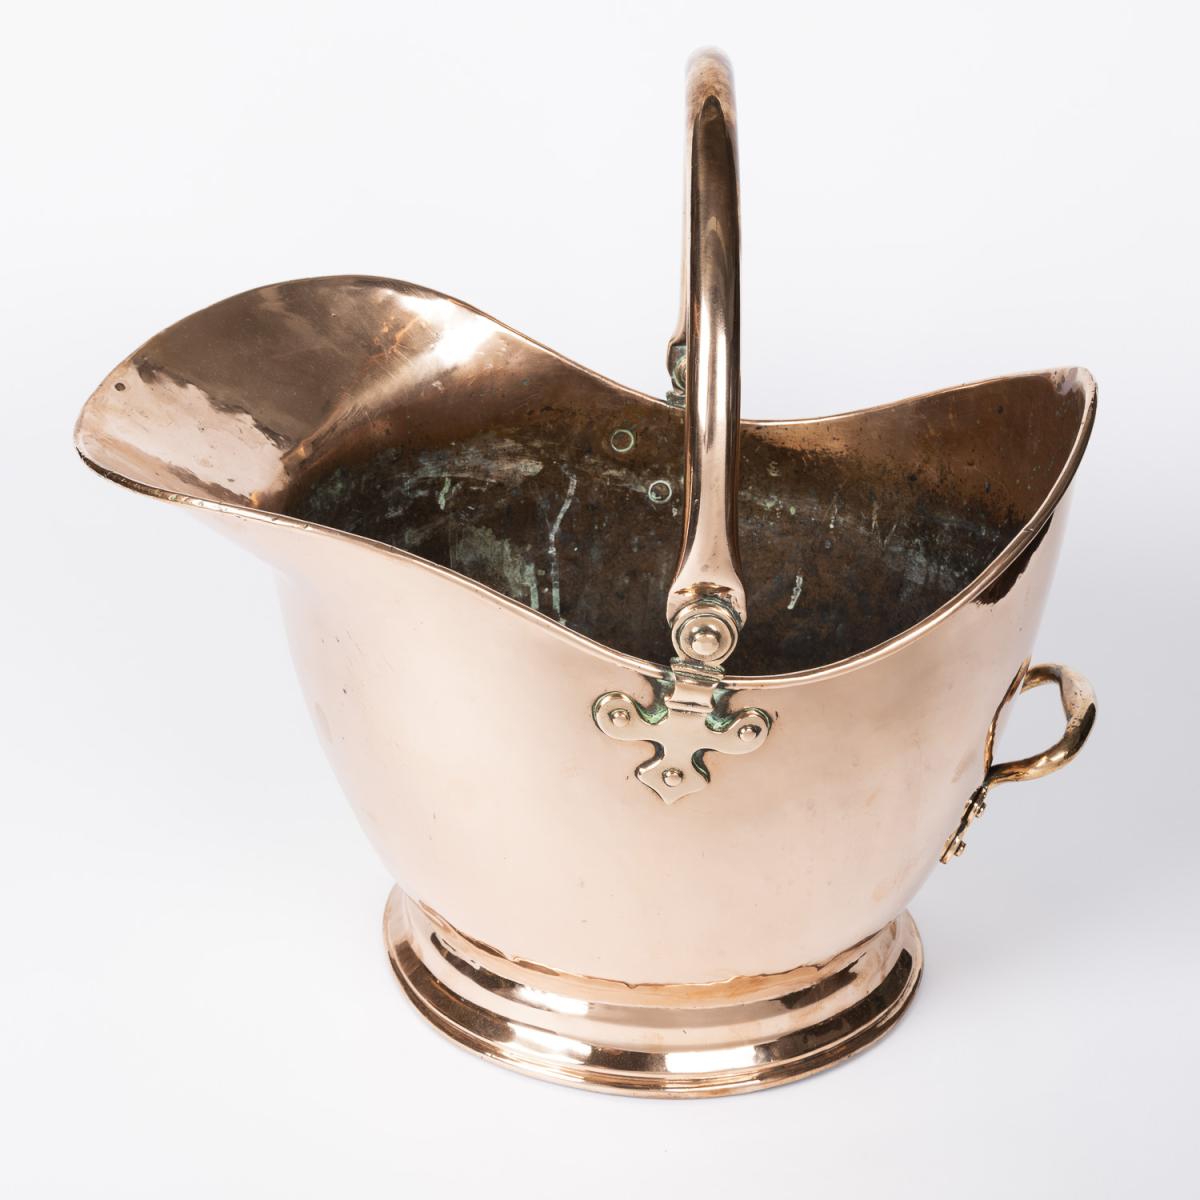 Copper coal scuttle by The Army & Navy Stores, London